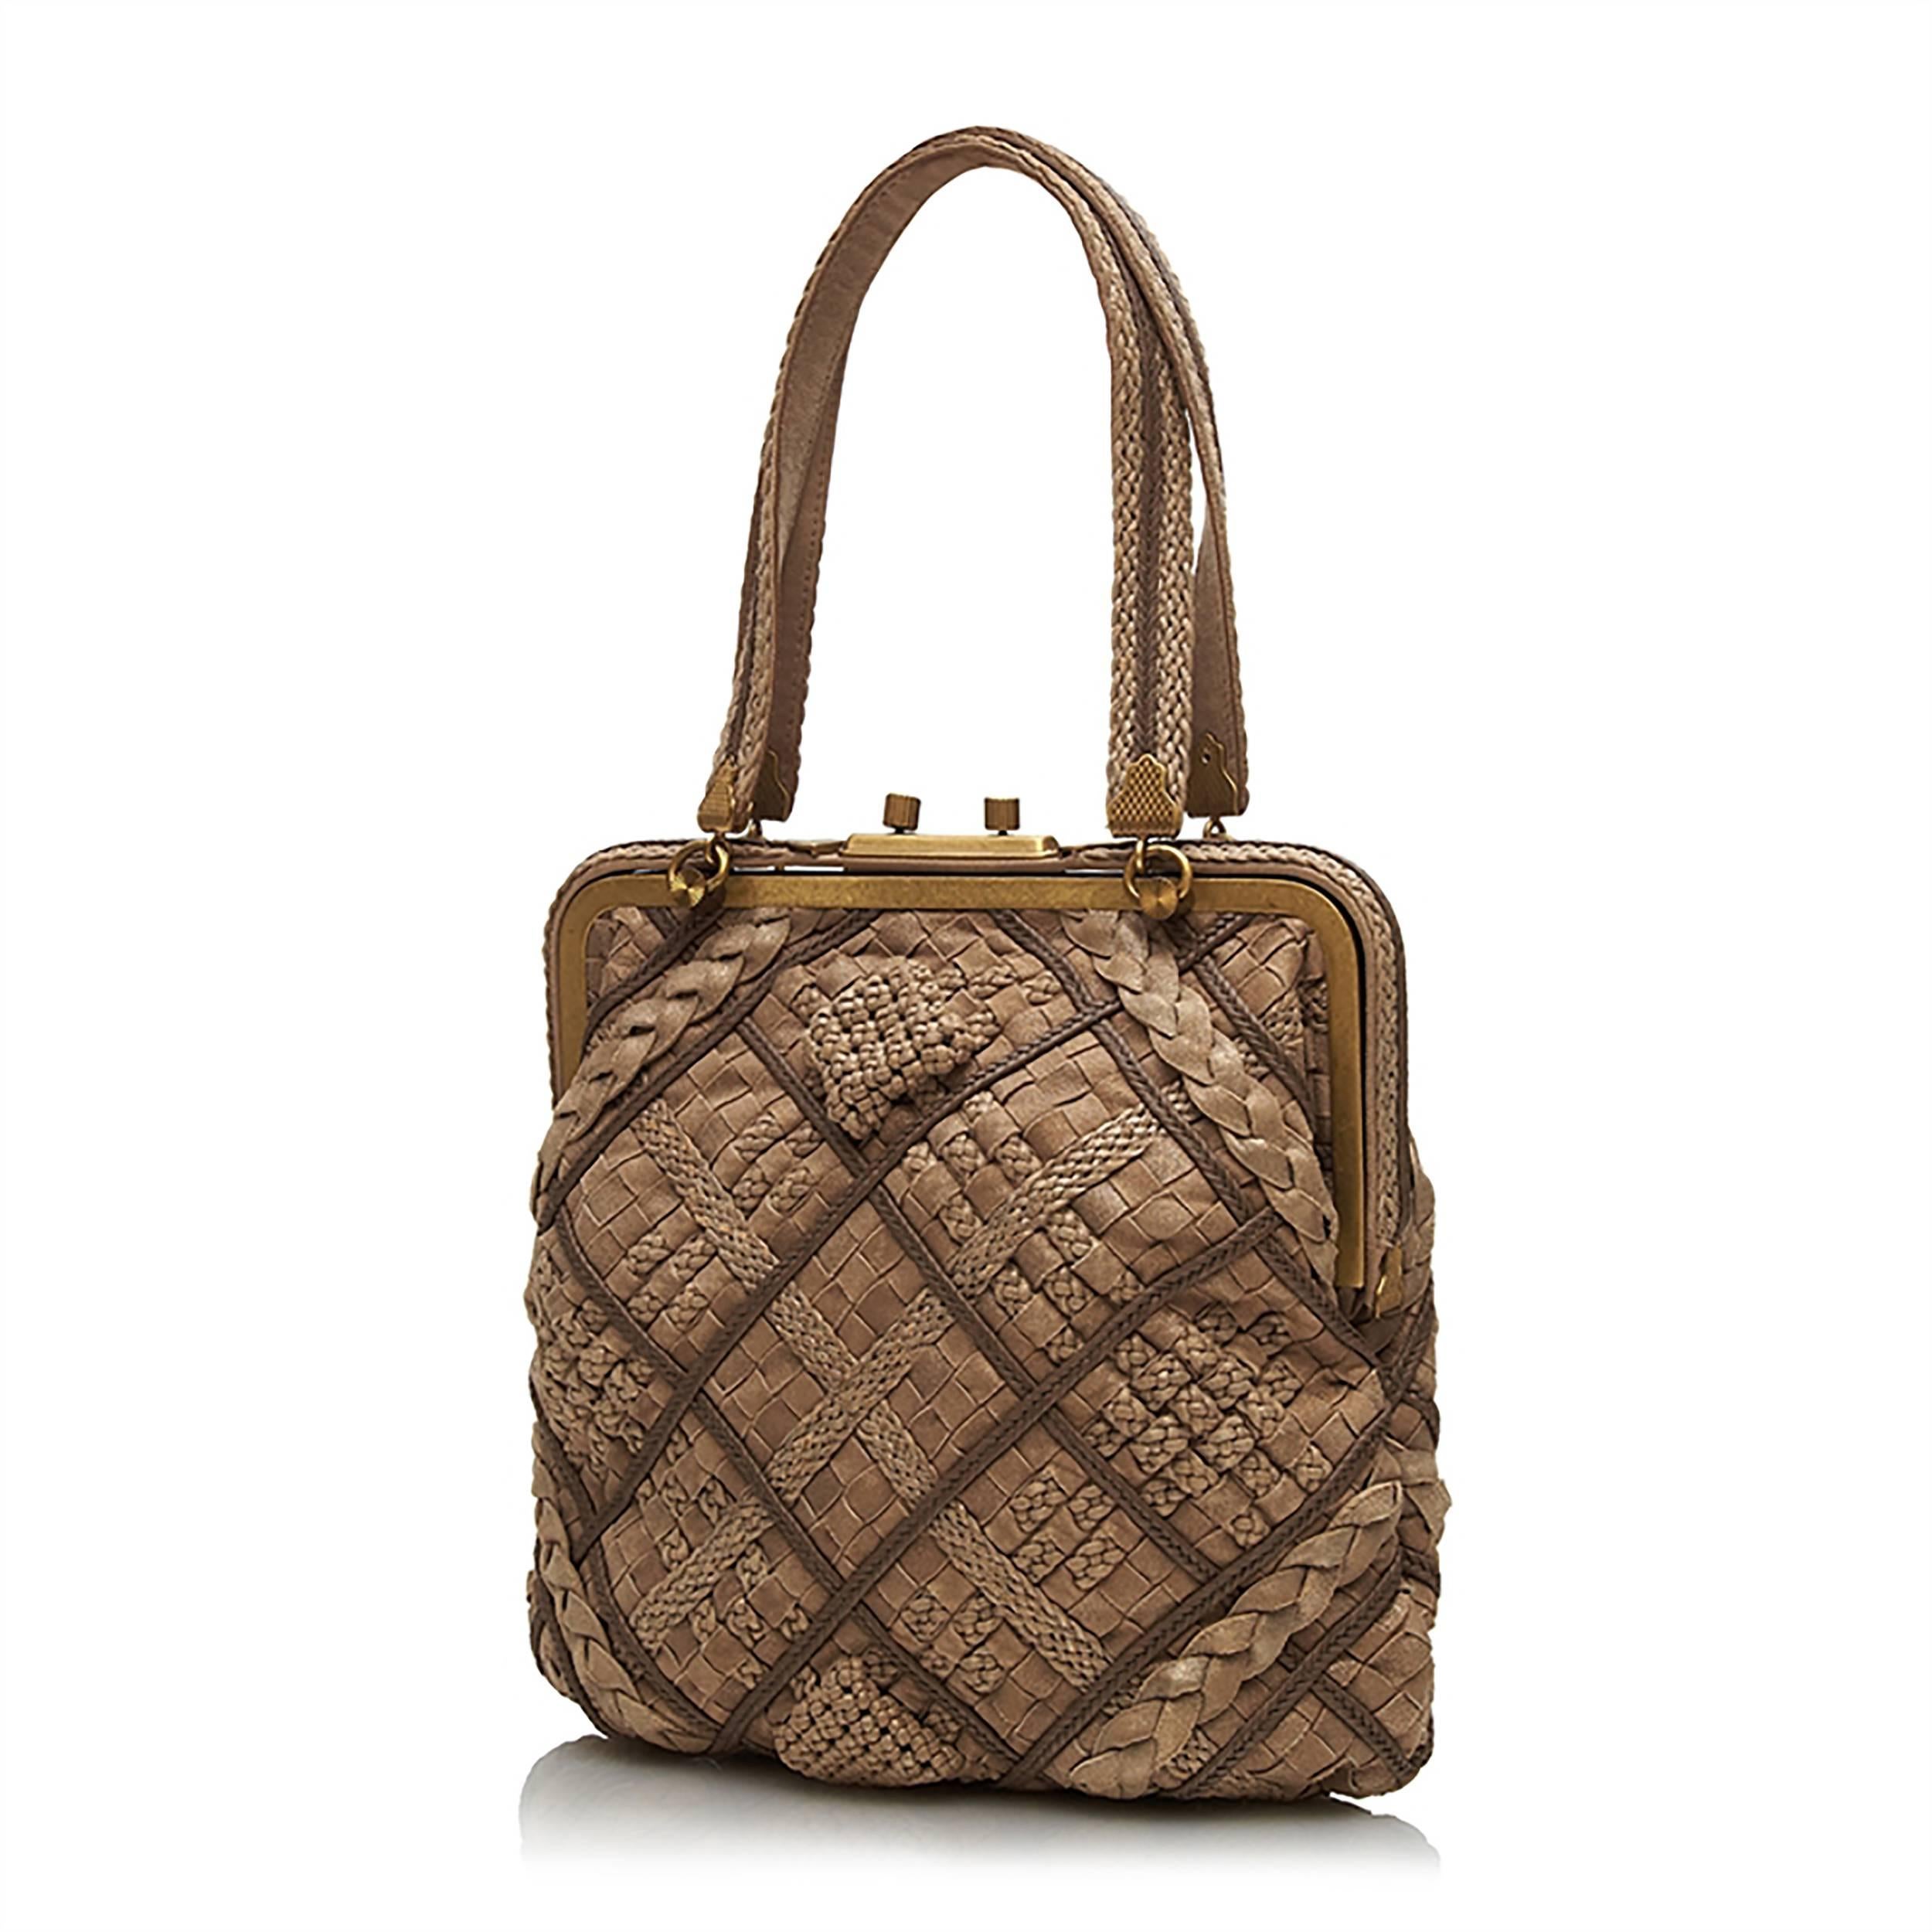 Bottega Veneta's signature Intrecciato woven leather is here rendered in an exquisite, brown square-shaped clutch. Its braided, patterned design exudes the artisanal aesthetic inherent to the Italian fashion house. This is luxuriantly offset by a